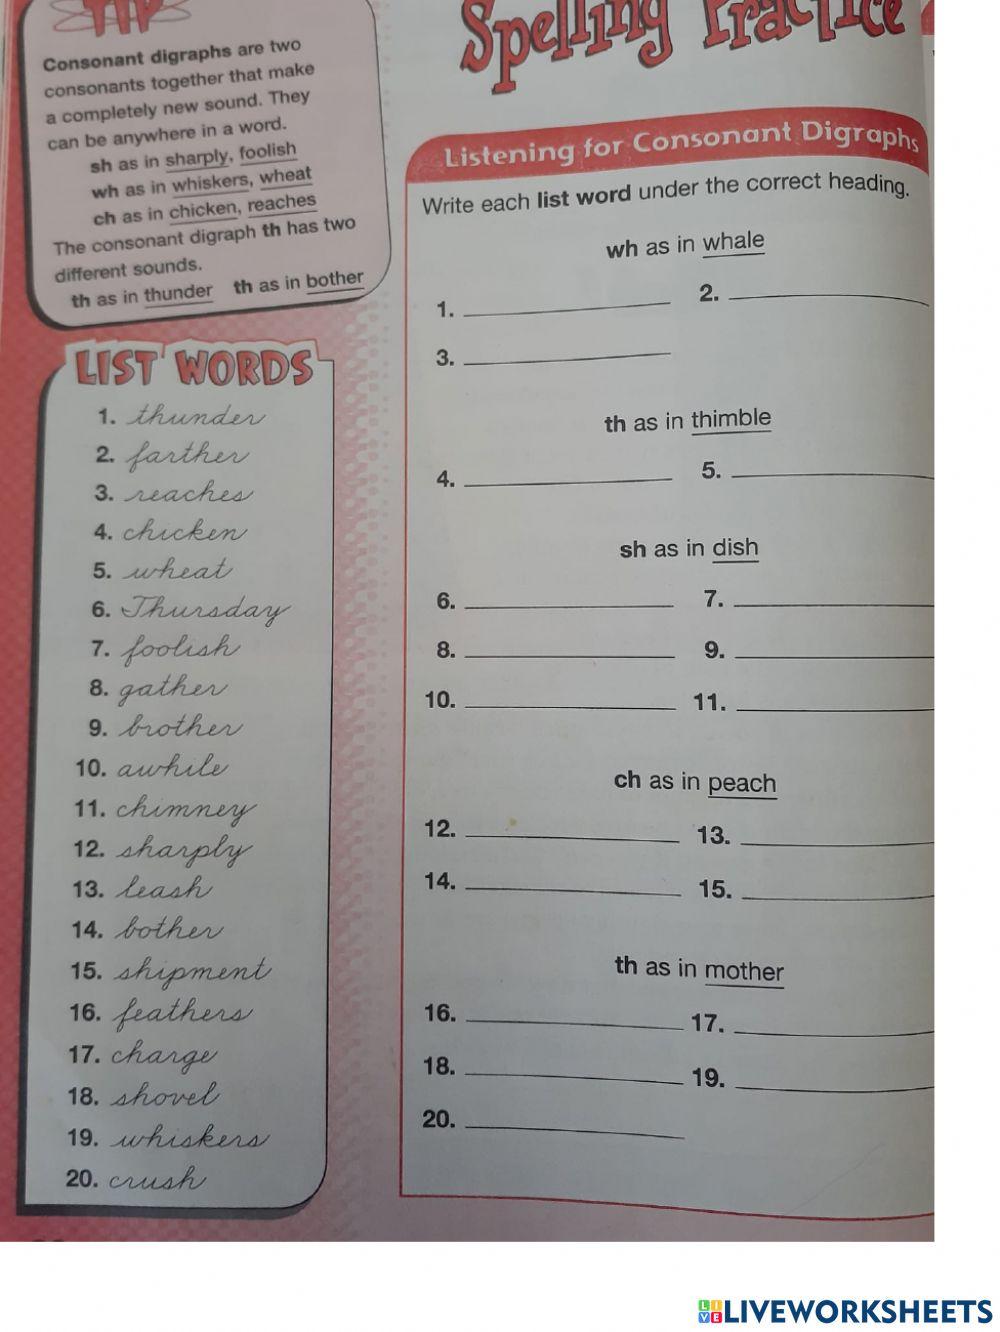 Spelling Workout pg. 38